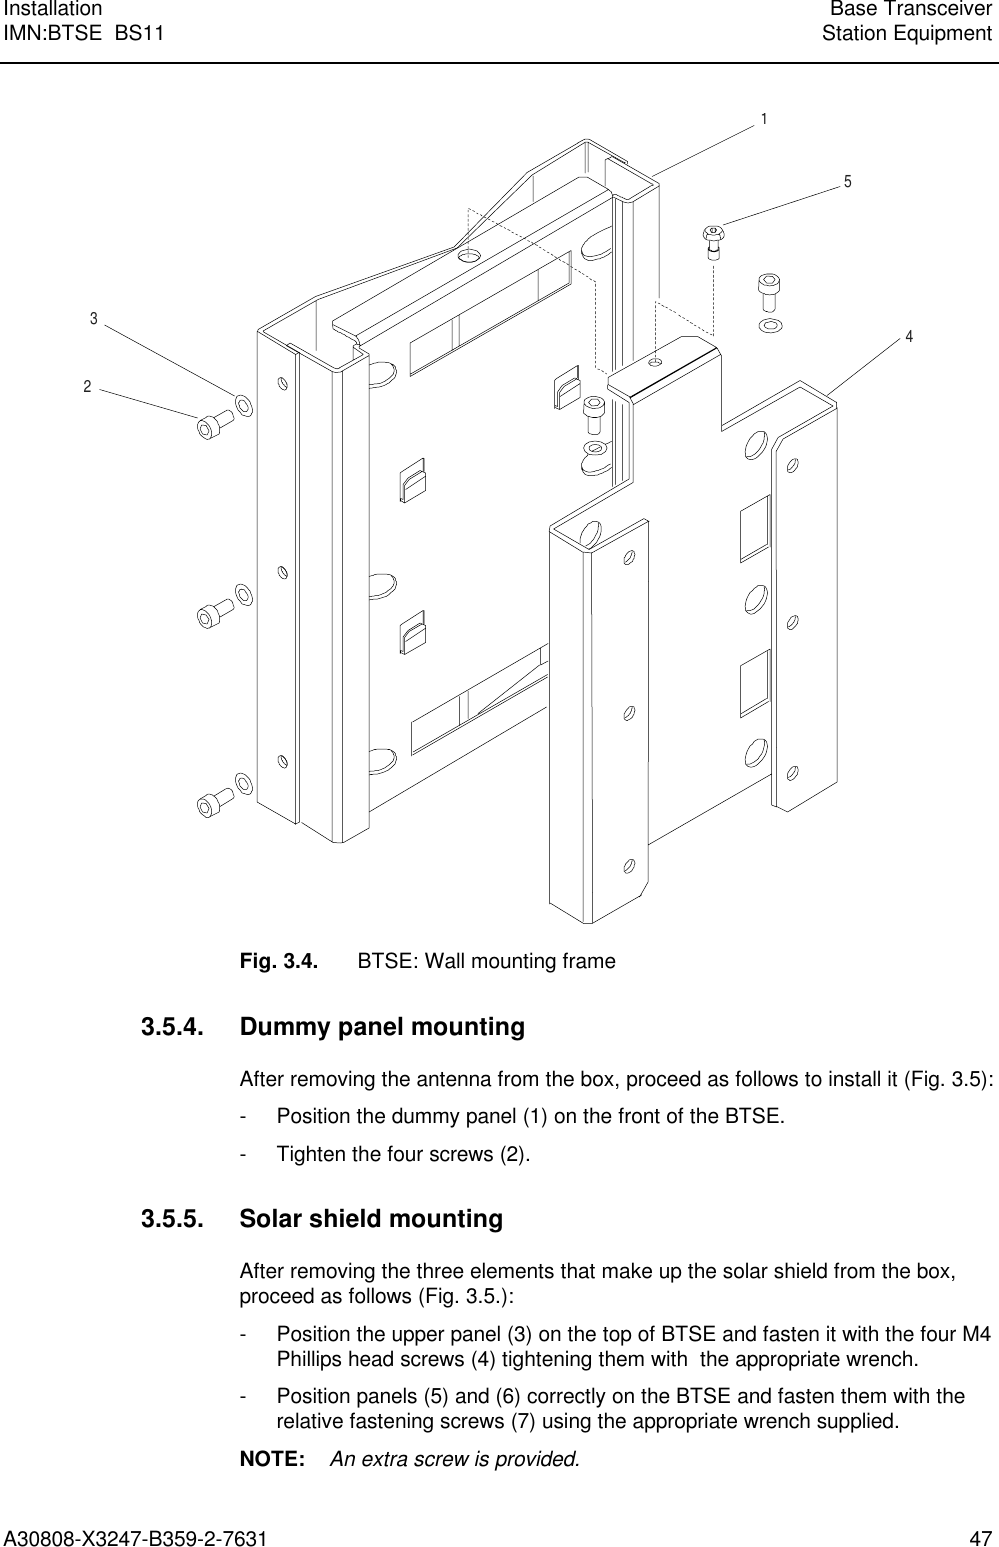  Installation Base TransceiverIMN:BTSE  BS11 Station EquipmentA30808-X3247-B359-2-7631 4715423Fig. 3.4. BTSE: Wall mounting frame3.5.4. Dummy panel mountingAfter removing the antenna from the box, proceed as follows to install it (Fig. 3.5):- Position the dummy panel (1) on the front of the BTSE.- Tighten the four screws (2).3.5.5. Solar shield mountingAfter removing the three elements that make up the solar shield from the box,proceed as follows (Fig. 3.5.):- Position the upper panel (3) on the top of BTSE and fasten it with the four M4Phillips head screws (4) tightening them with  the appropriate wrench.- Position panels (5) and (6) correctly on the BTSE and fasten them with therelative fastening screws (7) using the appropriate wrench supplied.NOTE:    An extra screw is provided.